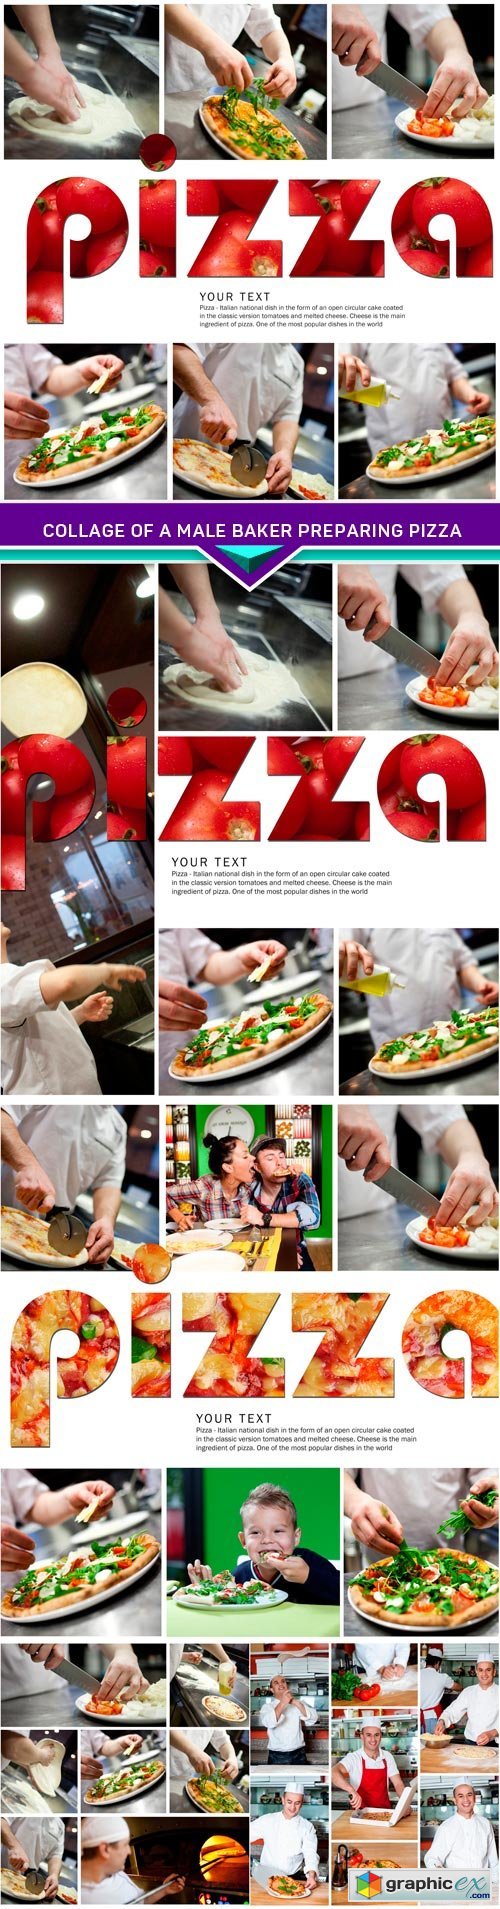 Collage of a male baker preparing pizza 5x JPEG